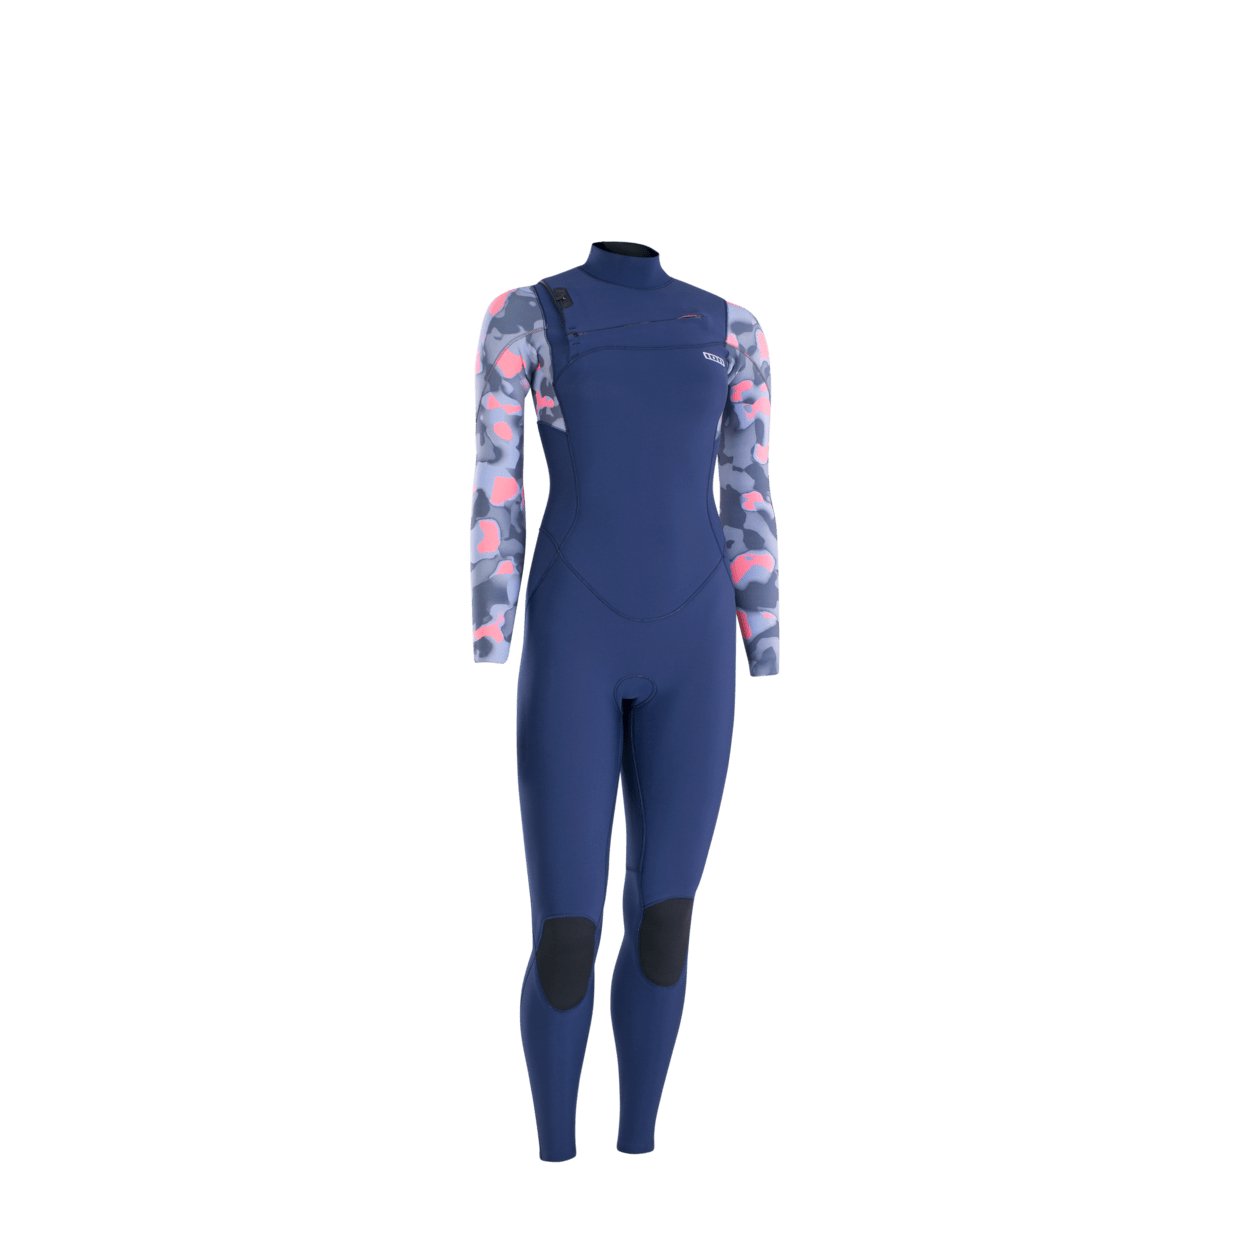 ION Women Wetsuit Amaze Amp 4/3 Front Zip 2023 - Worthing Watersports - 9010583057866 - Wetsuits - ION Water